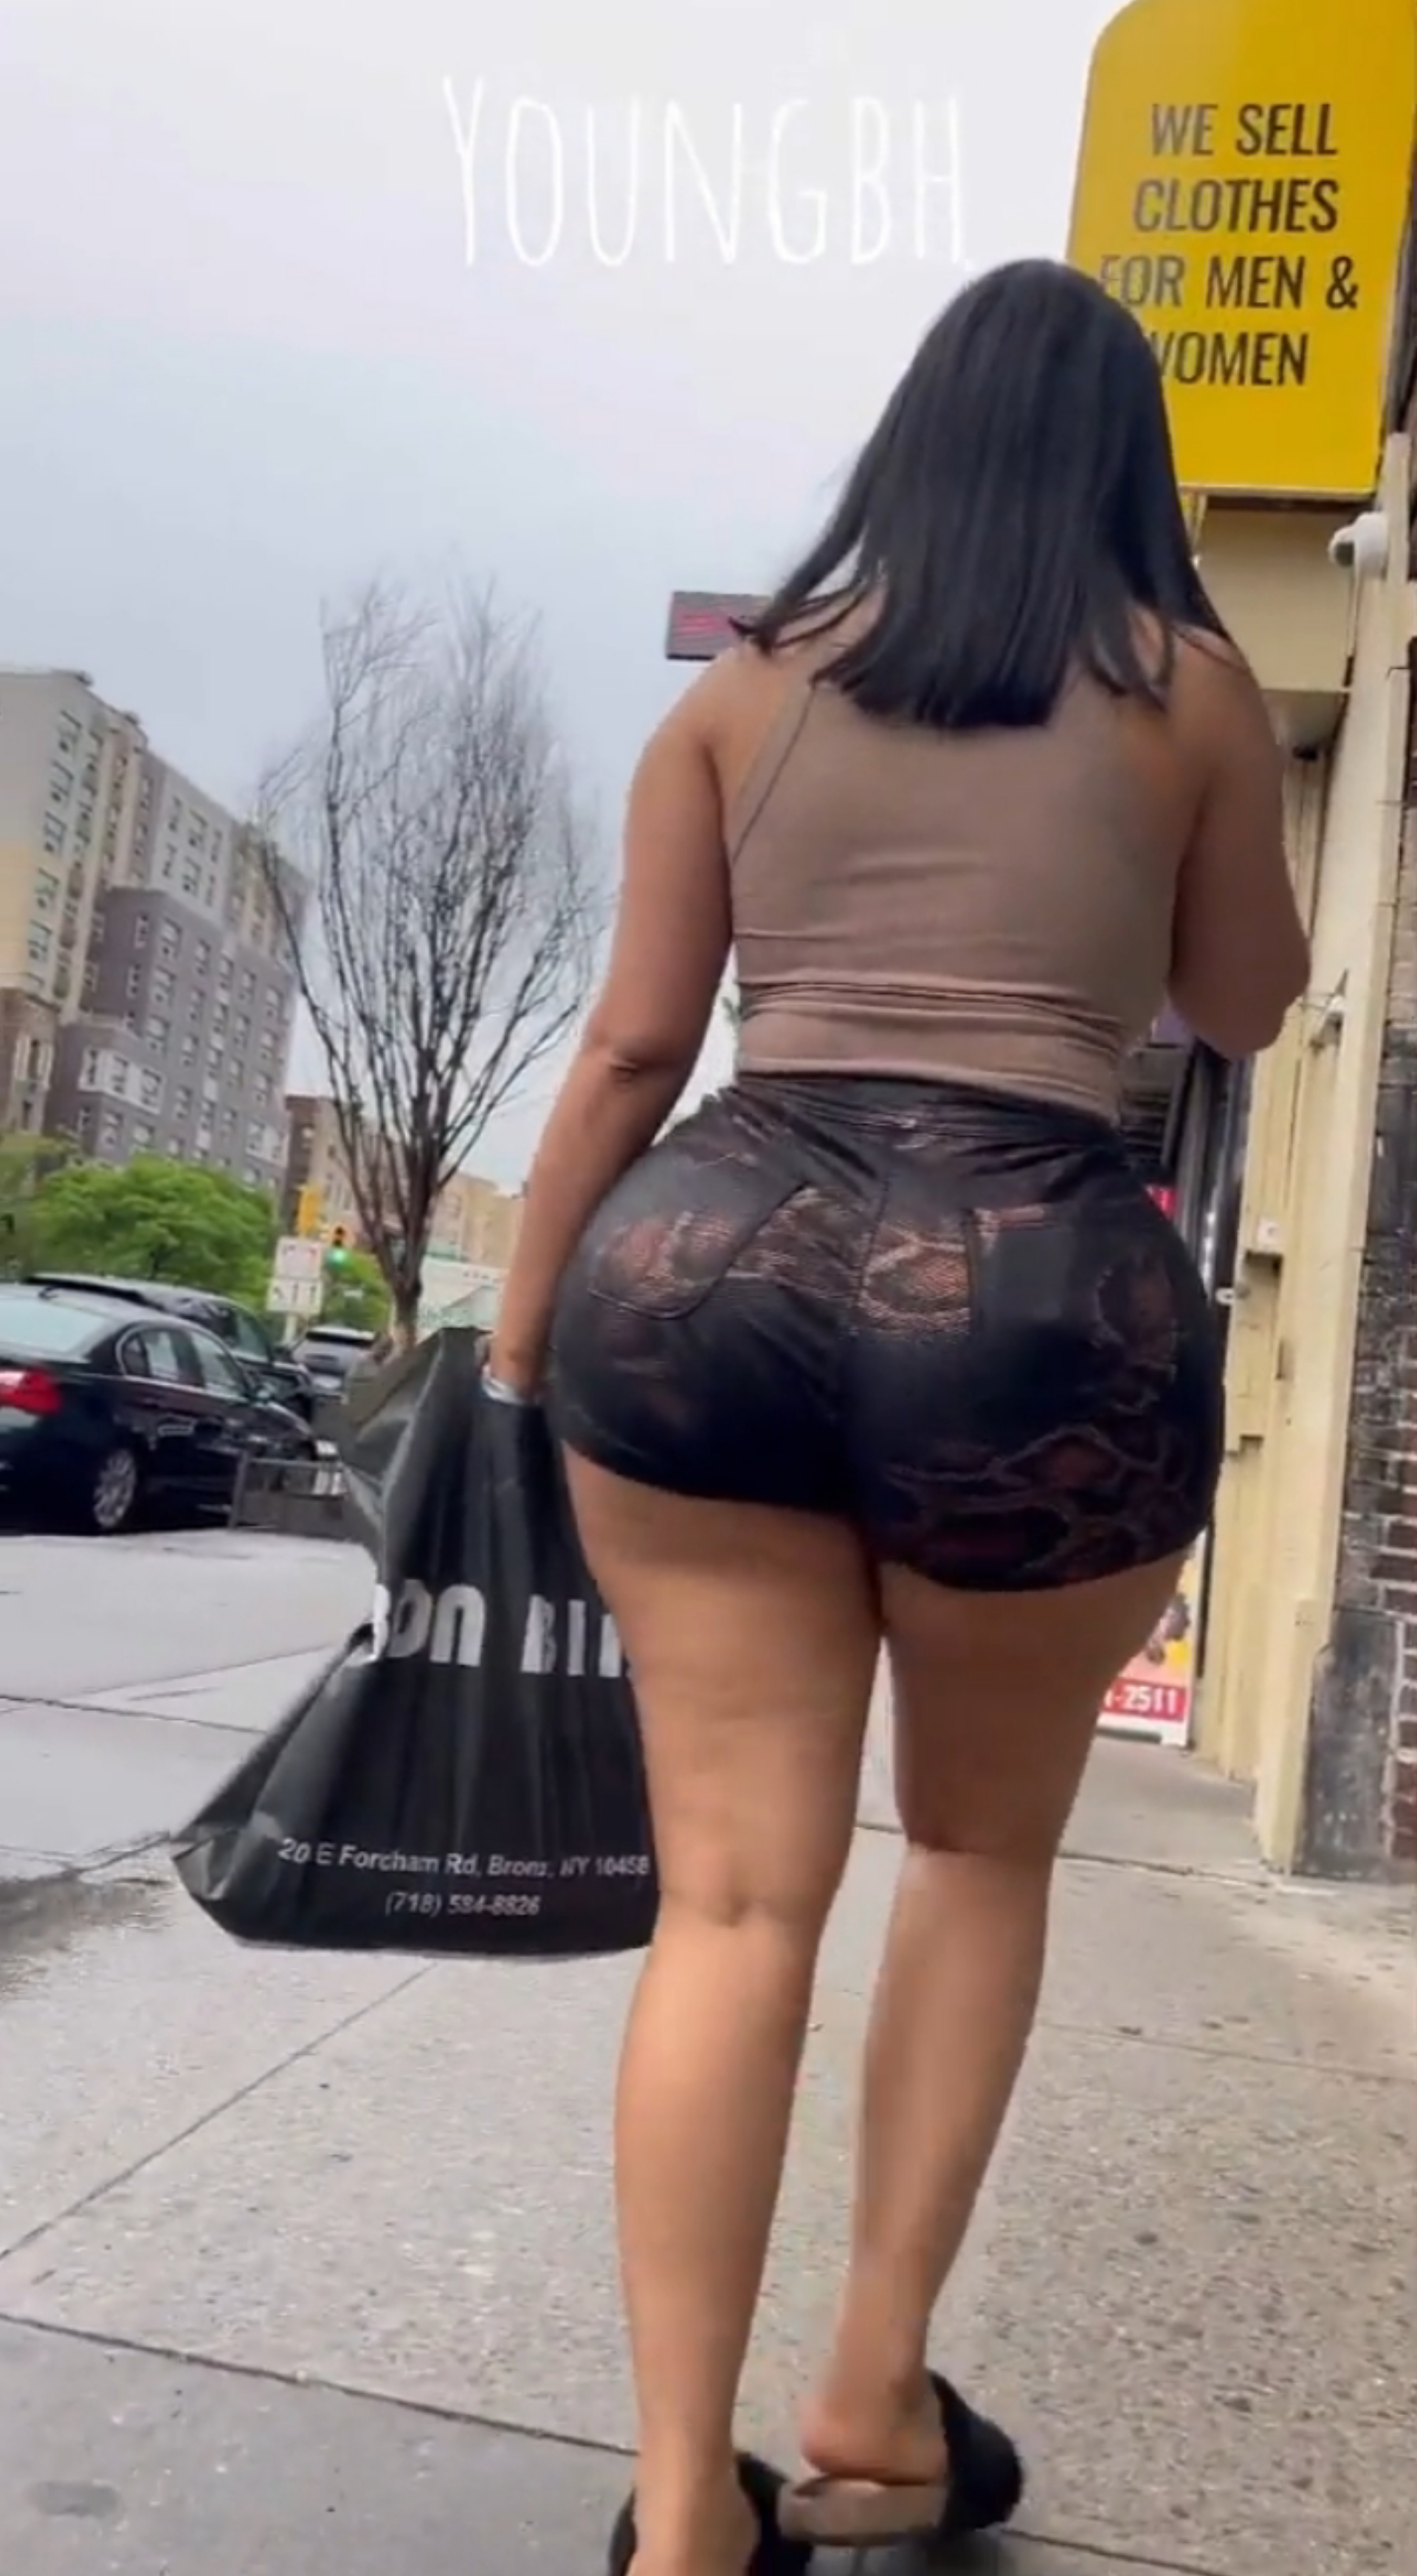 FOLLOWED HER THICK ATTRACTIVE ASS ALL THE WAY HOME